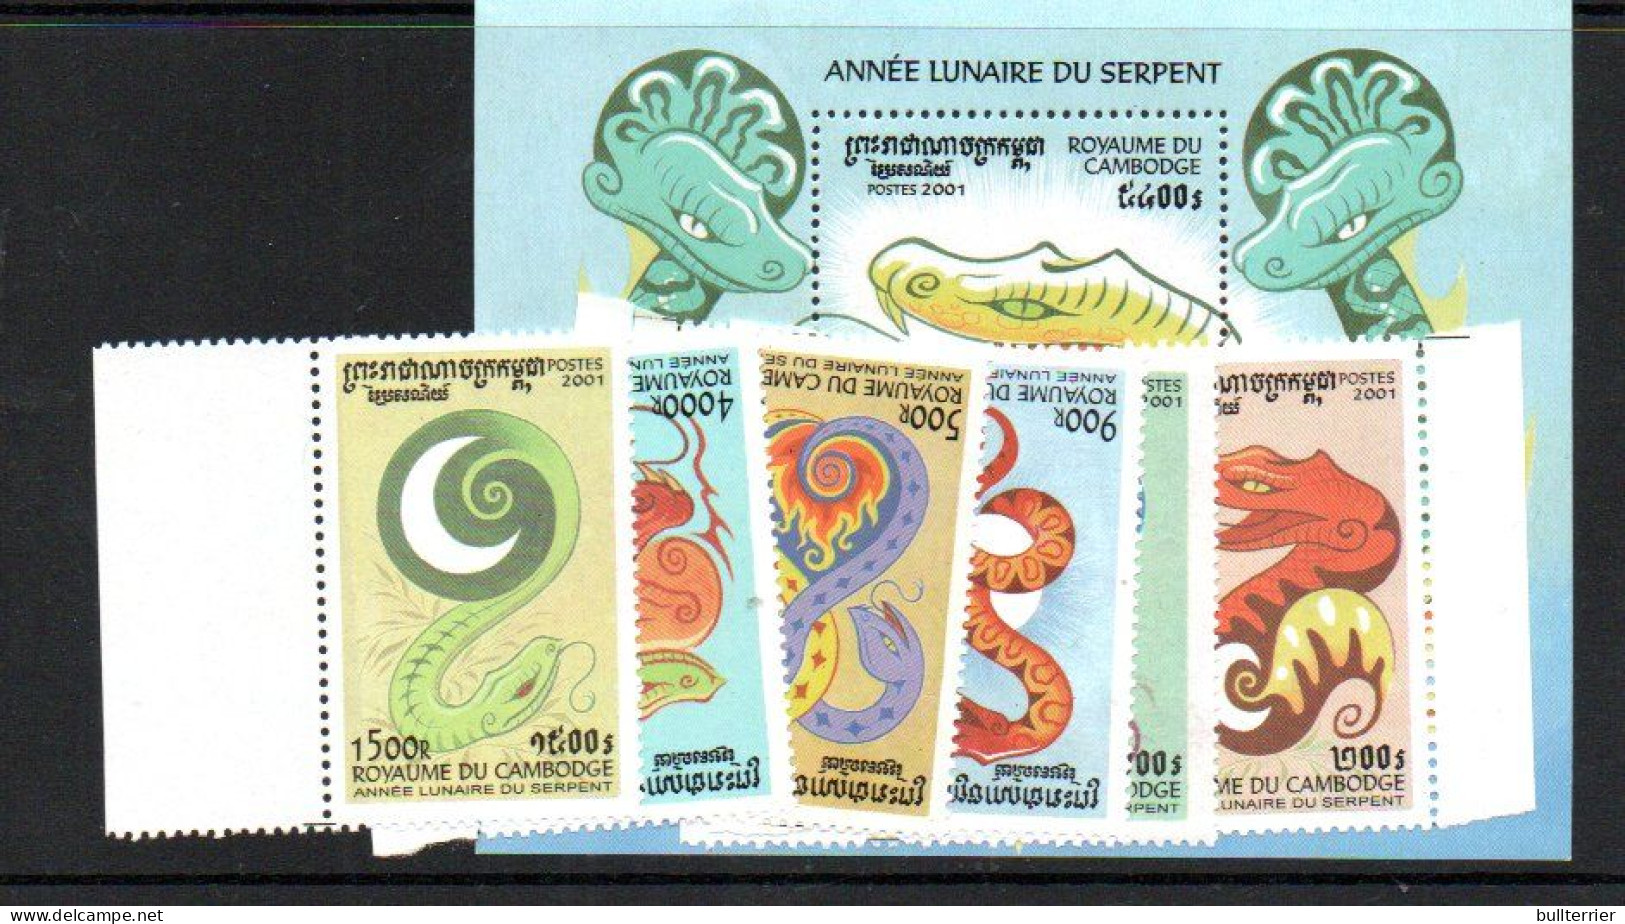 CAMBODIA - 2001- YEAR OF THE SNAKE SET OF  6 + SOUVENIR SHEET  MINT NEVER HINGED SG CAT £14.10 - Cambodge